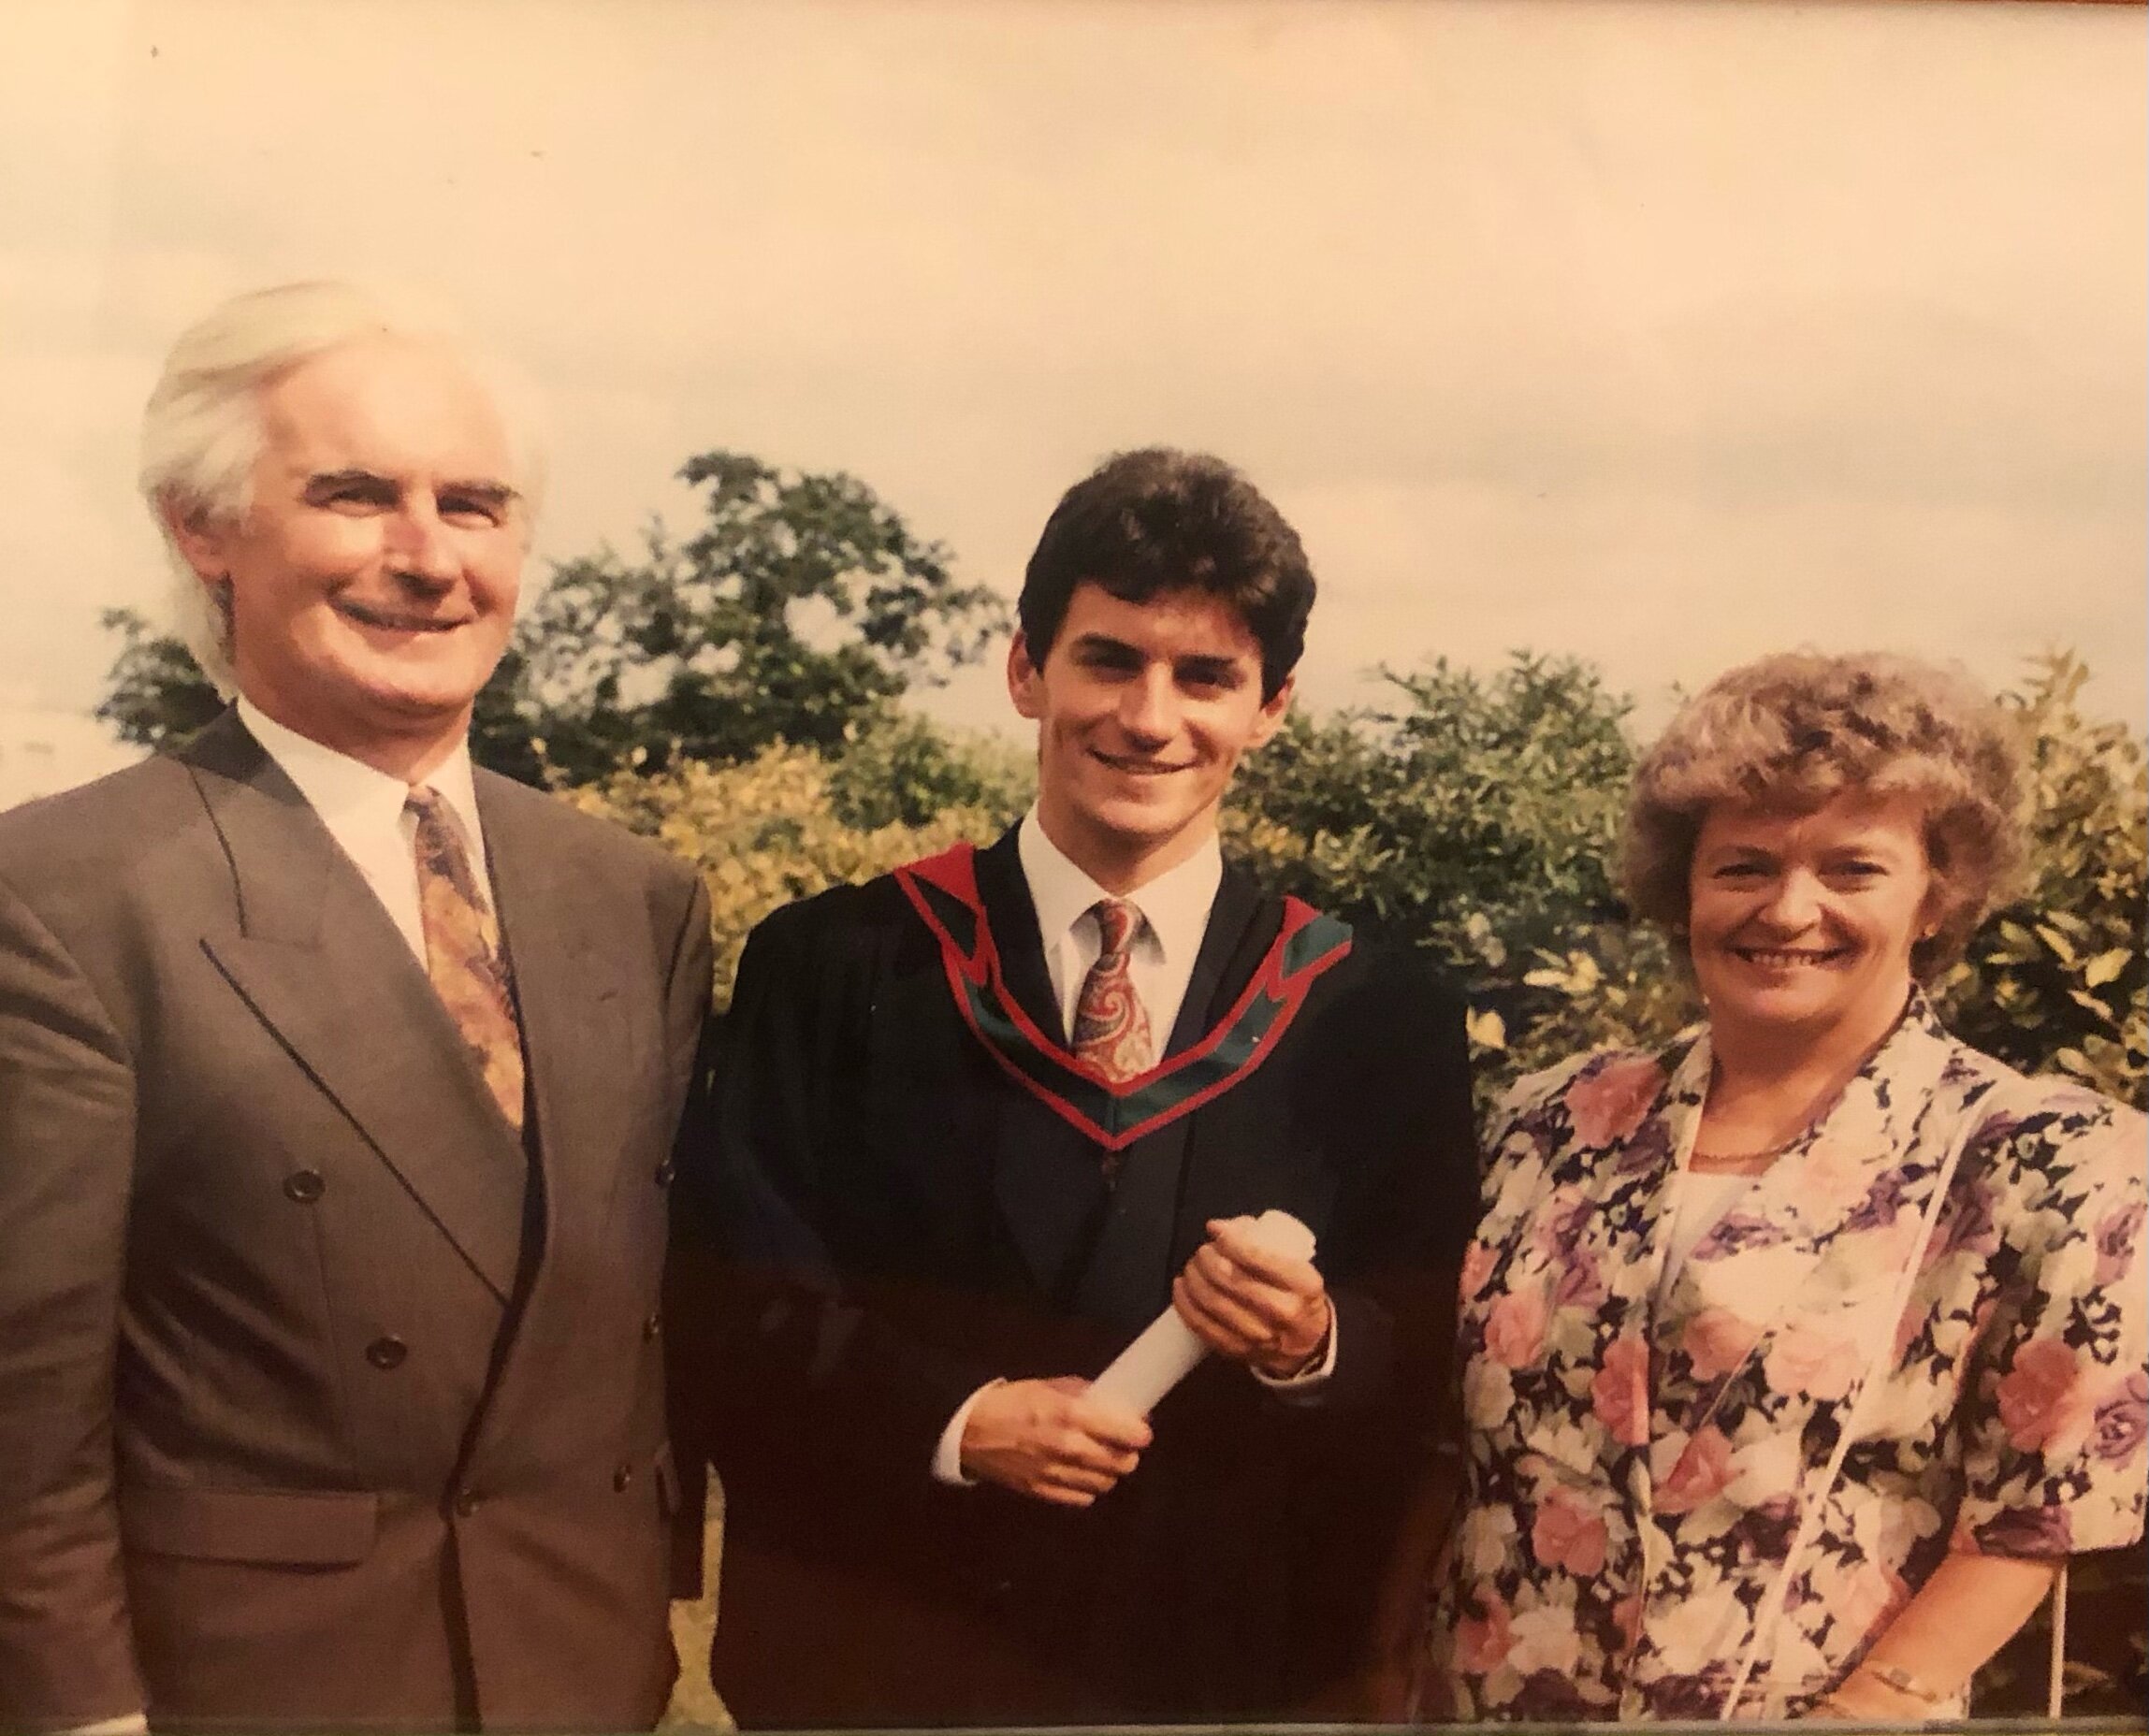 At my graduation in 1992 with my mum and dad.